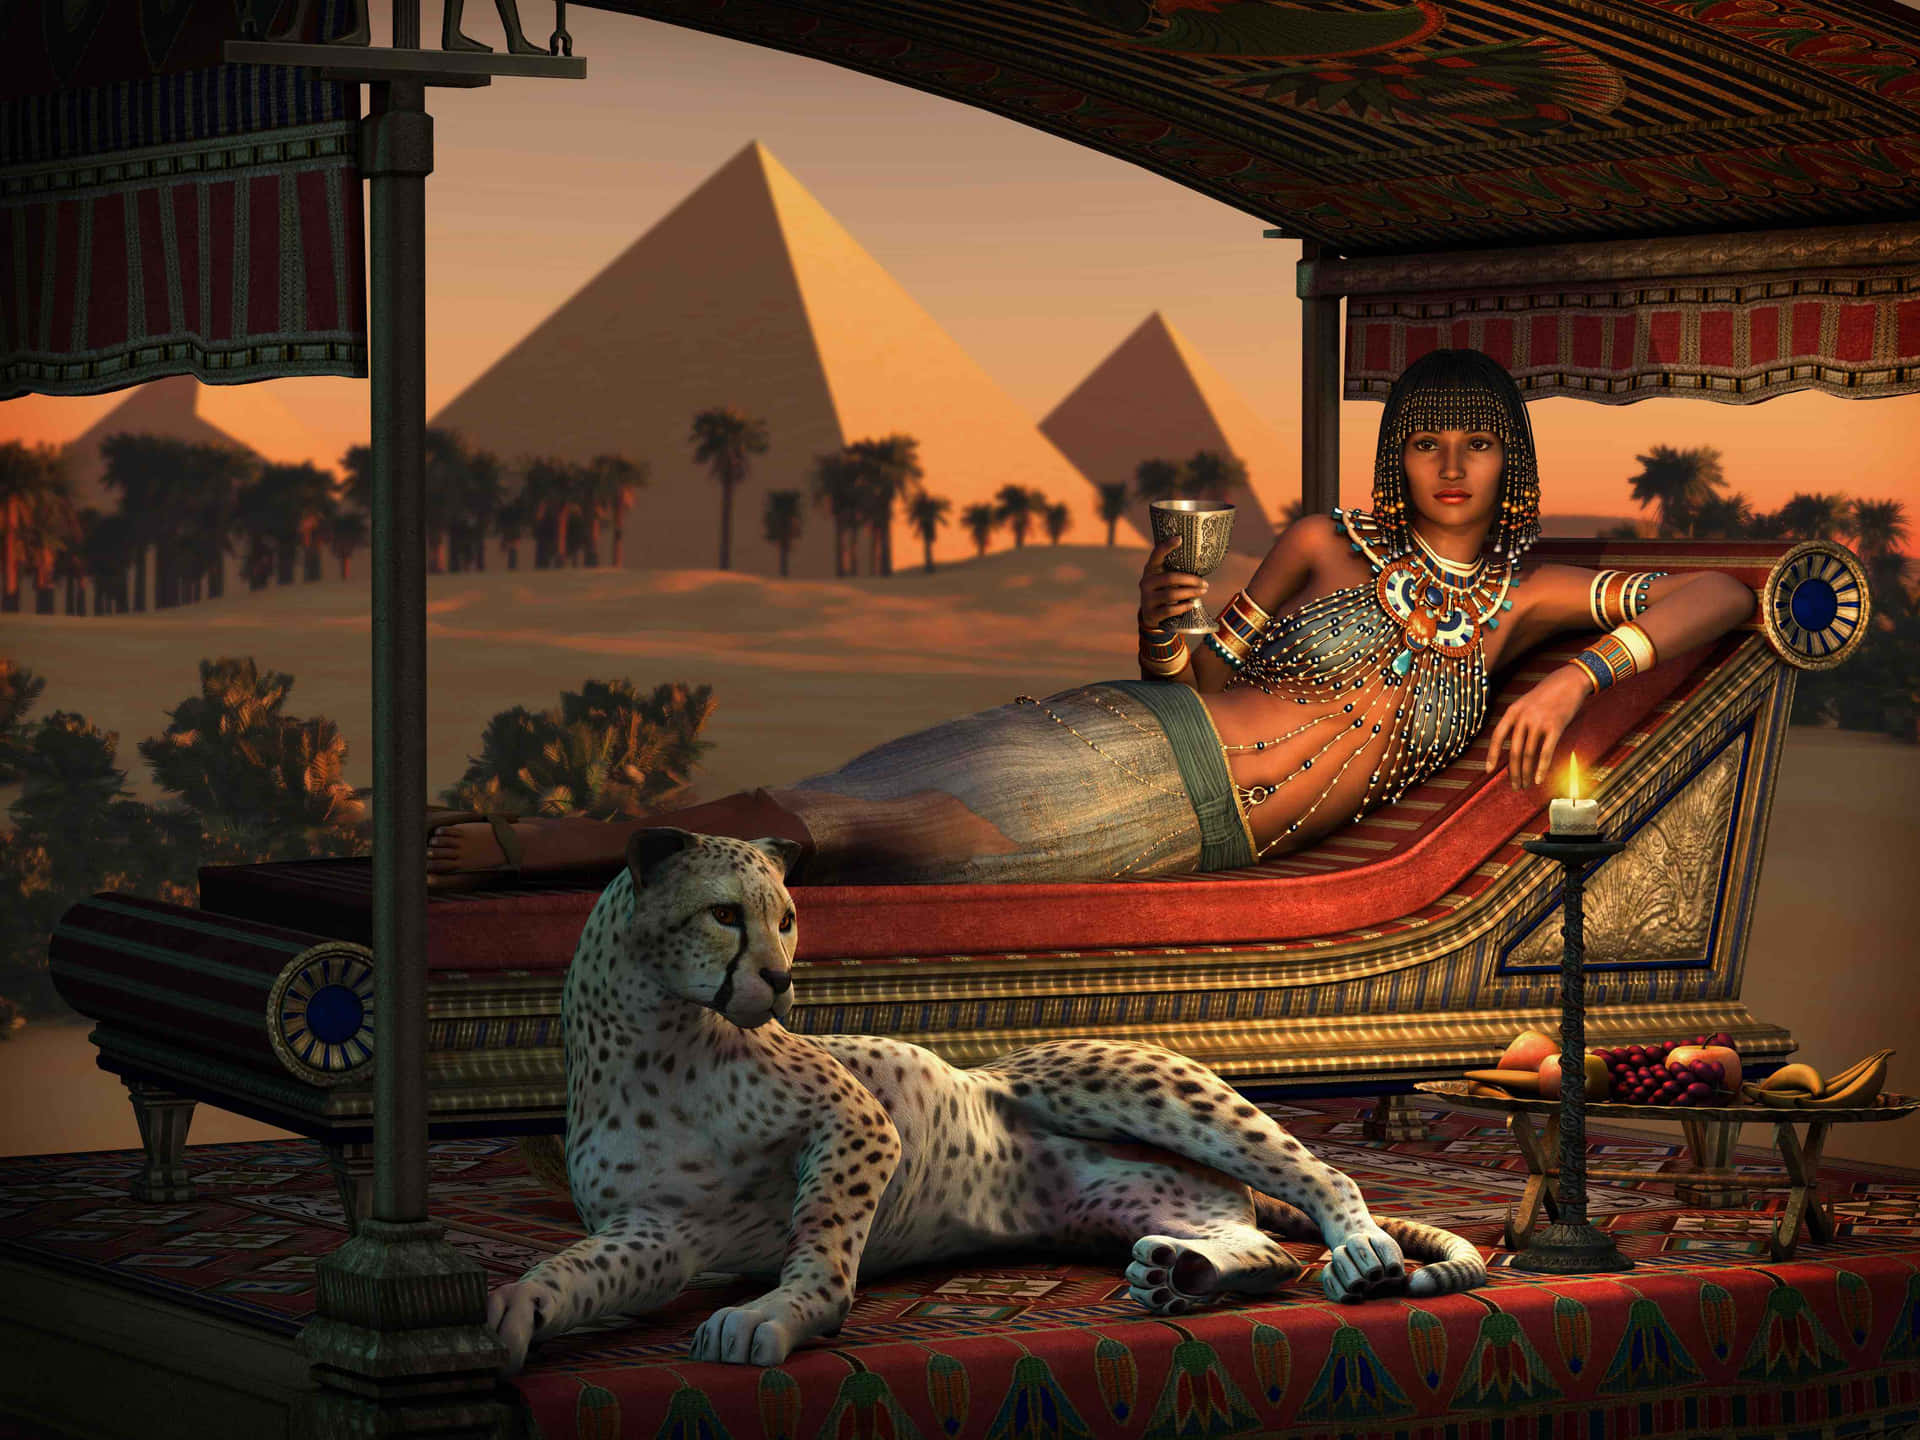 Legendary Egyptian ruler Cleopatra in a classic pose